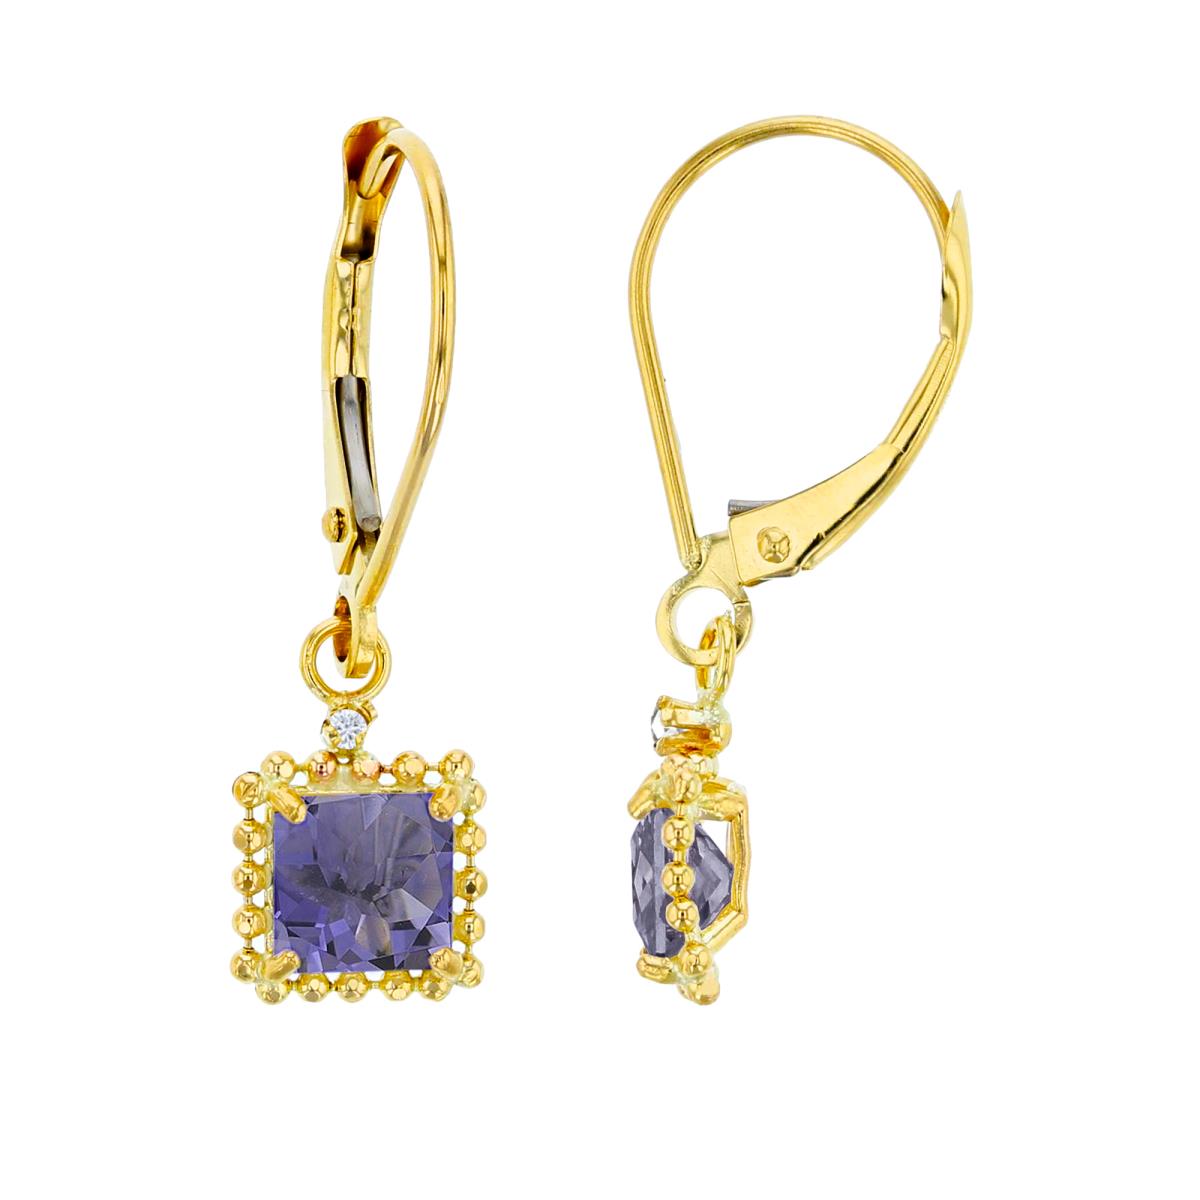 14K Yellow Gold 1.25mm Rd Created White Sapphire & 5mm Sq Iolite Bead Frame Drop Lever-Back Earring